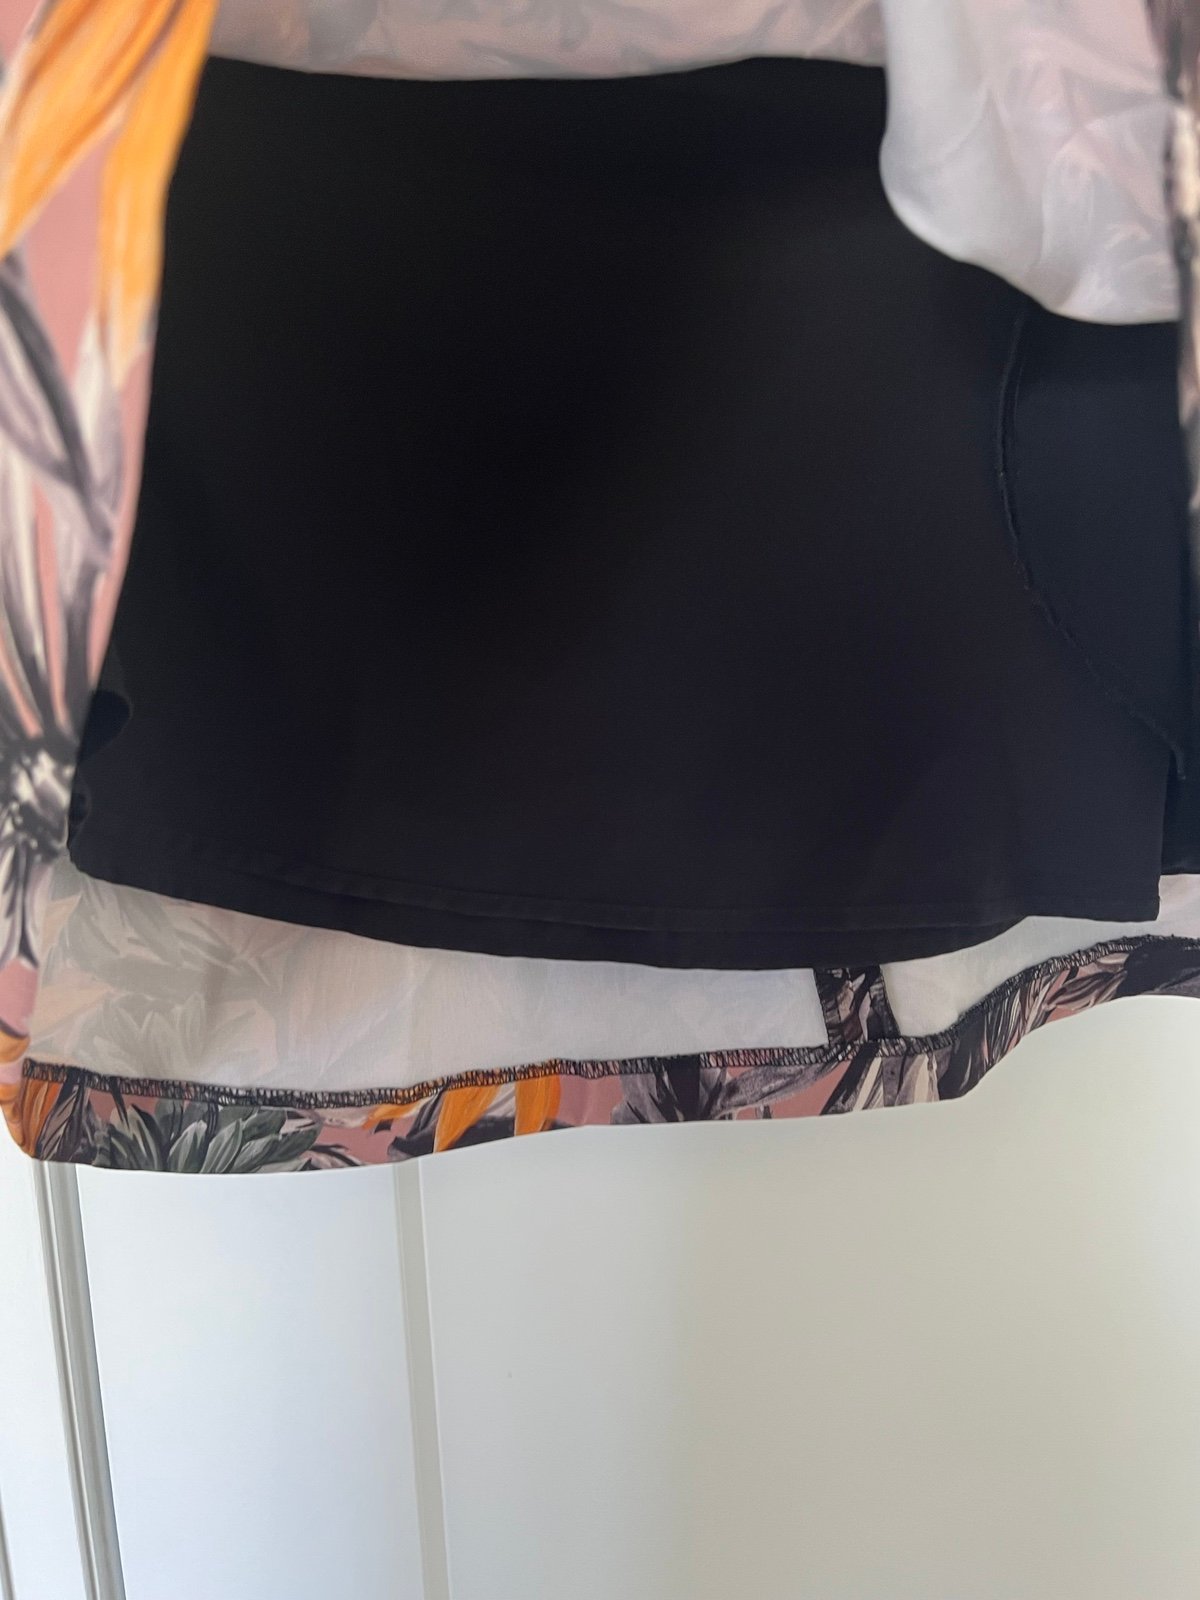 Nice floral skirt from anthropologie MVq8Yz6q6 Online Exclusive